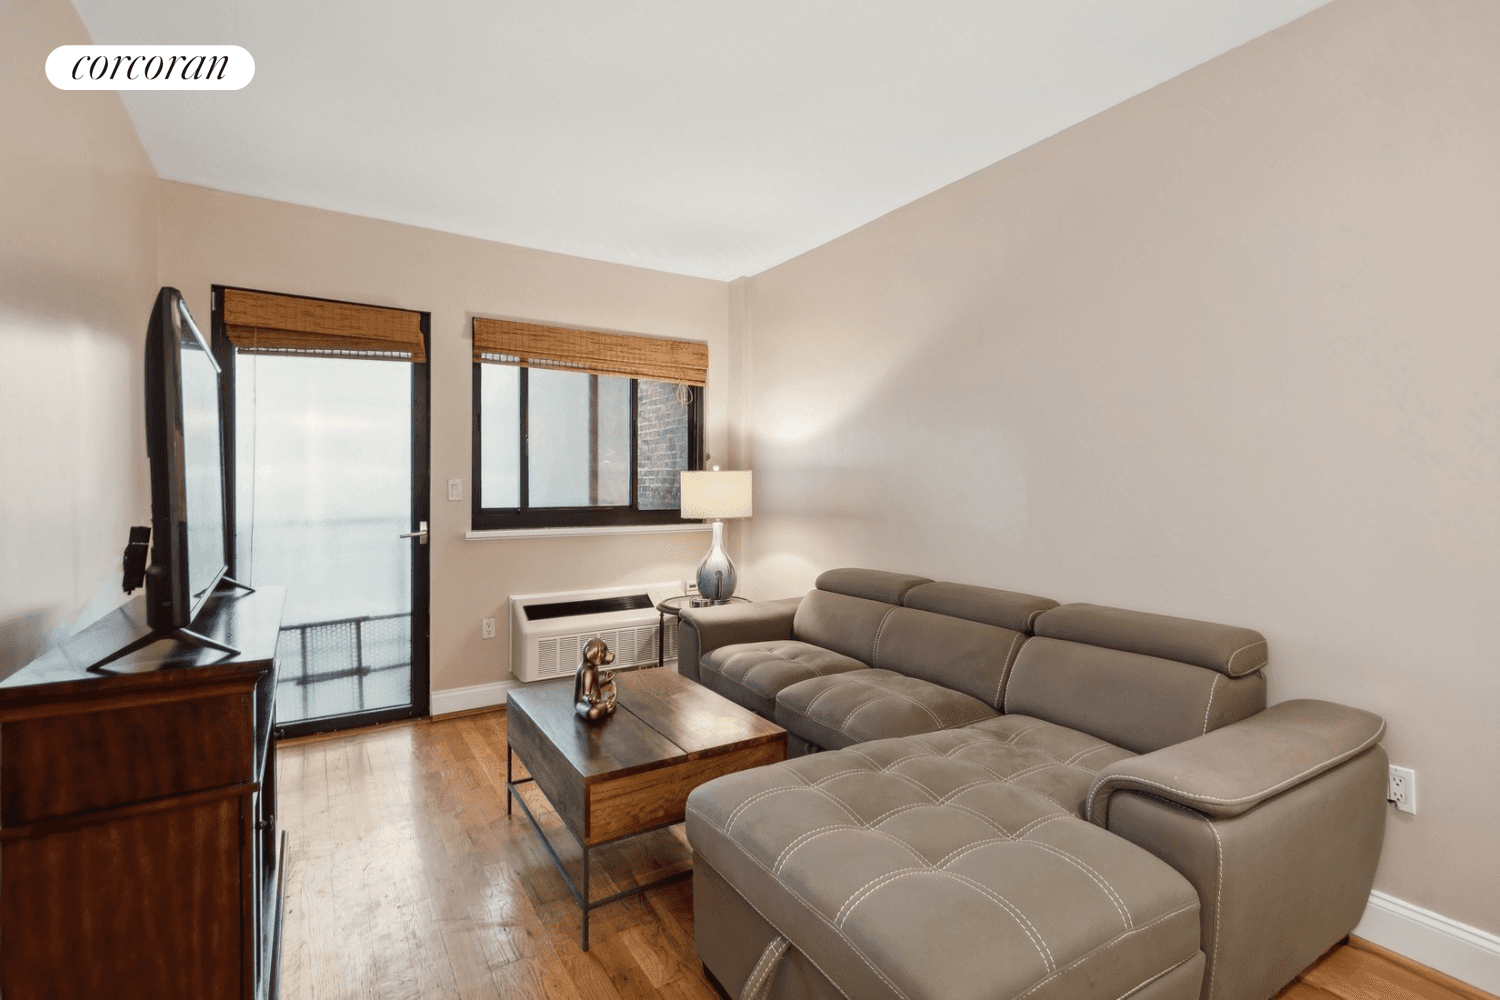 Nestled in the heart of Midtown South, this exquisite 1 bedroom residence boasts a sleek open kitchen equipped with a breakfast bar and top of the line stainless steel appliances, ...